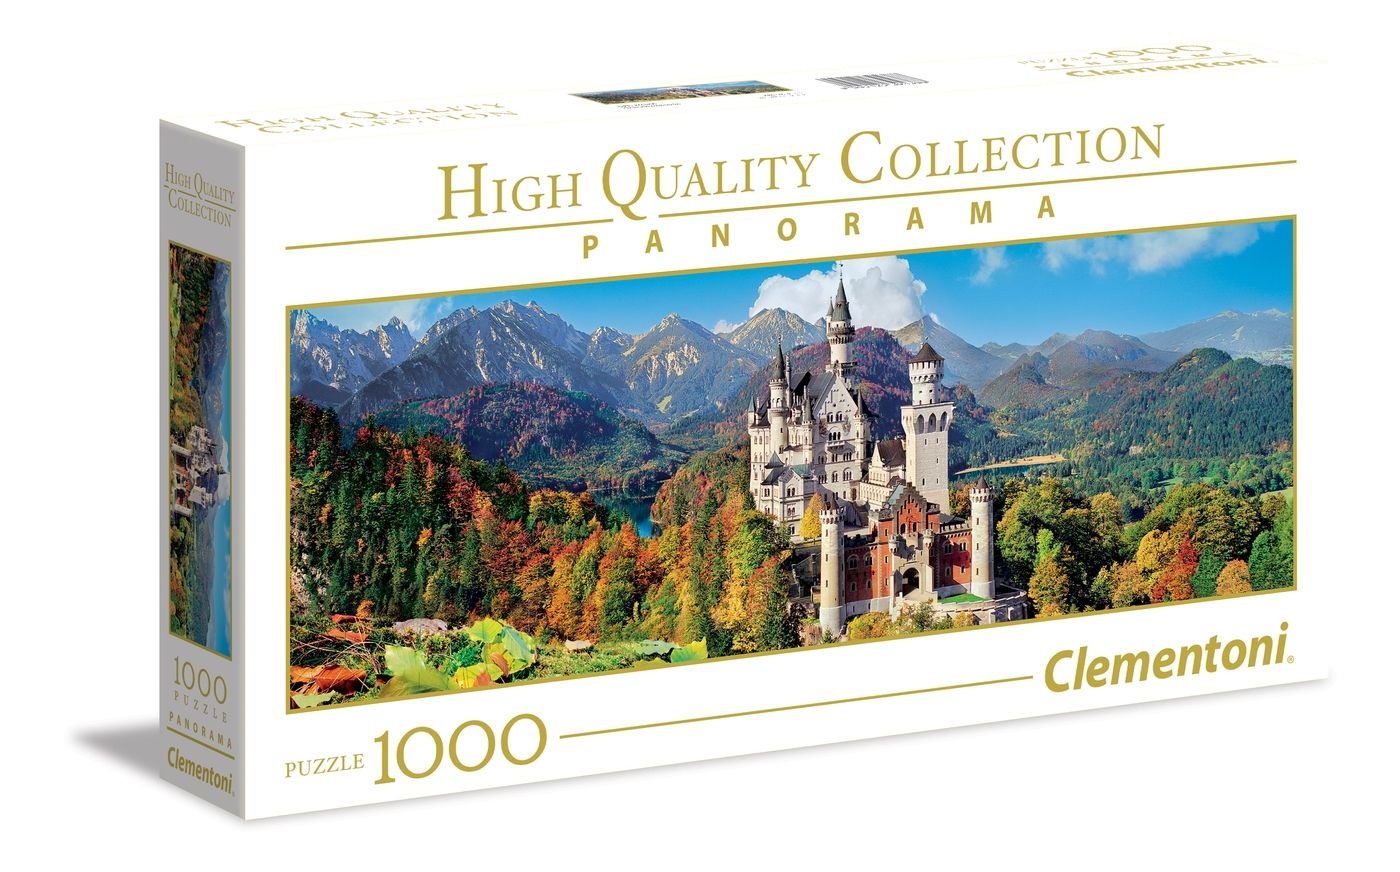 Clementoni Puzzle Panorama Neuschwanstein High Quality Collection A